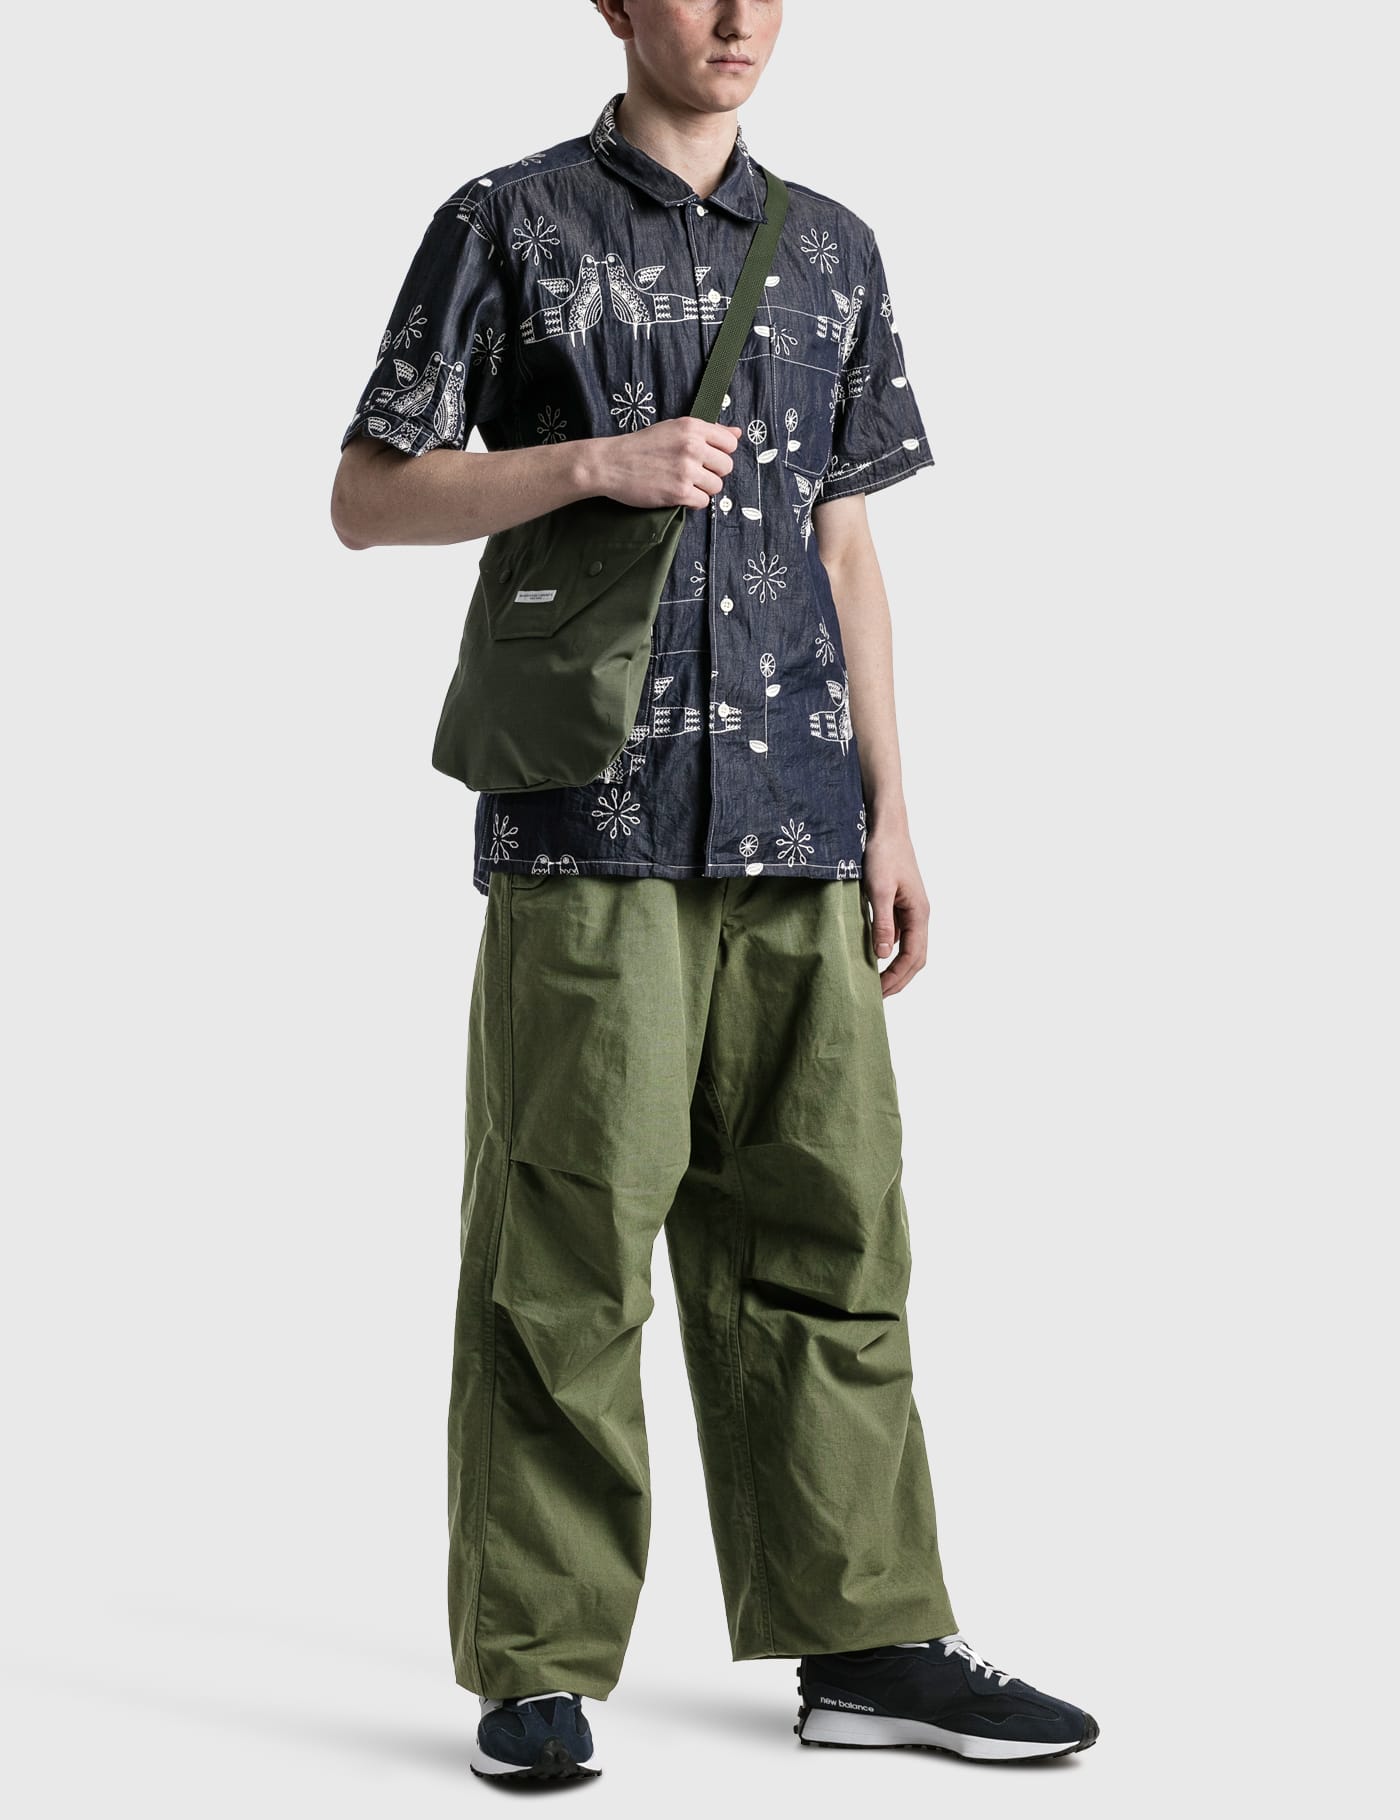 Engineered Garments - Over Pants | HBX - Globally Curated Fashion 